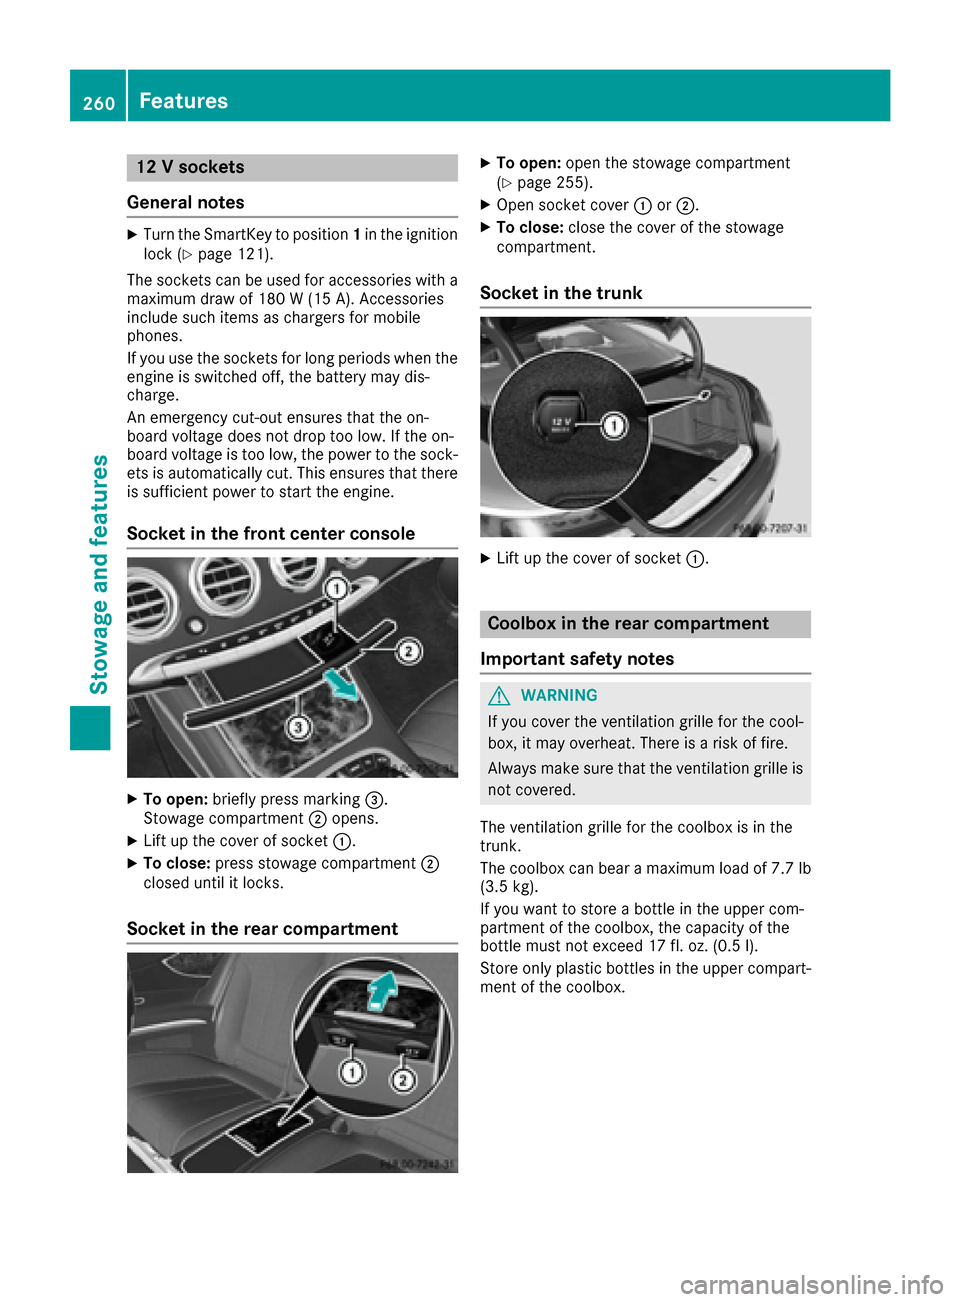 MERCEDES-BENZ S-Class COUPE 2017 C217 Owners Manual 12 V sockets
General notes
XTurn the SmartKey to position 1in the ignition
lock (Ypage 121).
The sockets can be used for accessories with a maximum draw of 180 W (15 A). Accessories
include such items